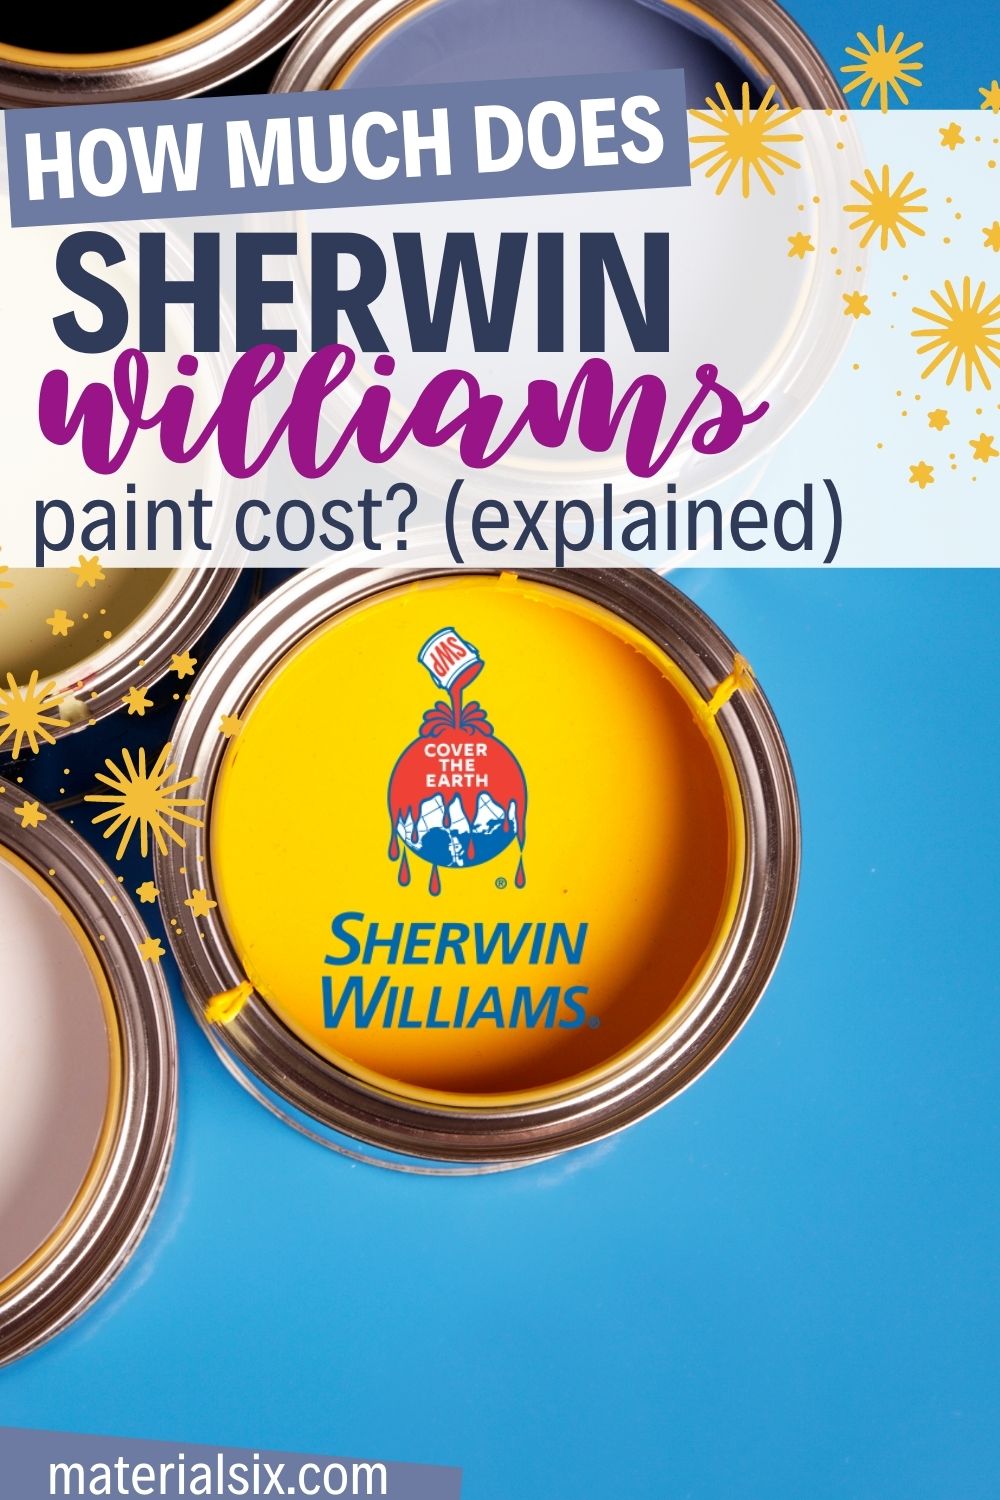 How Much Does Sherwin Williams Paint Cost (Explained)